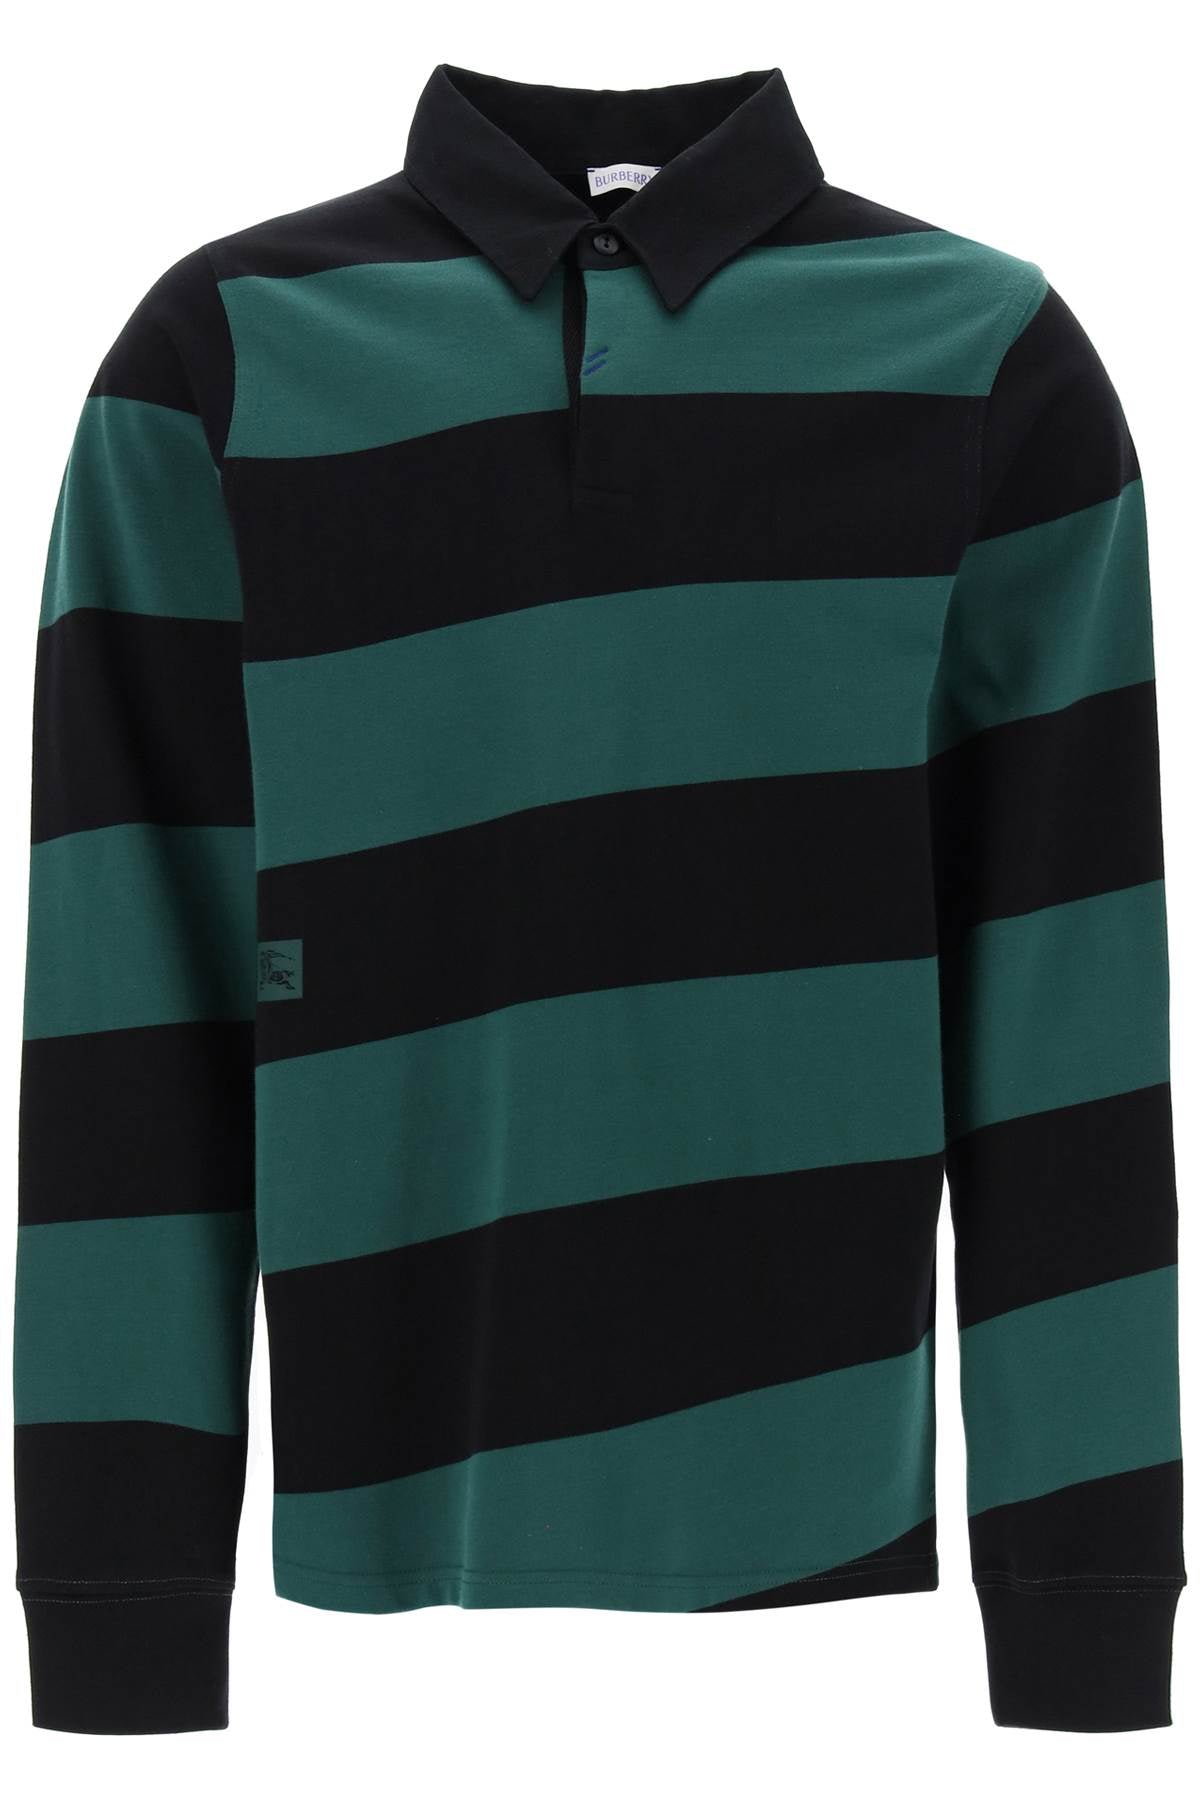 Shop Burberry Multicolored Striped Long Sleeve Polo Shirt For Men